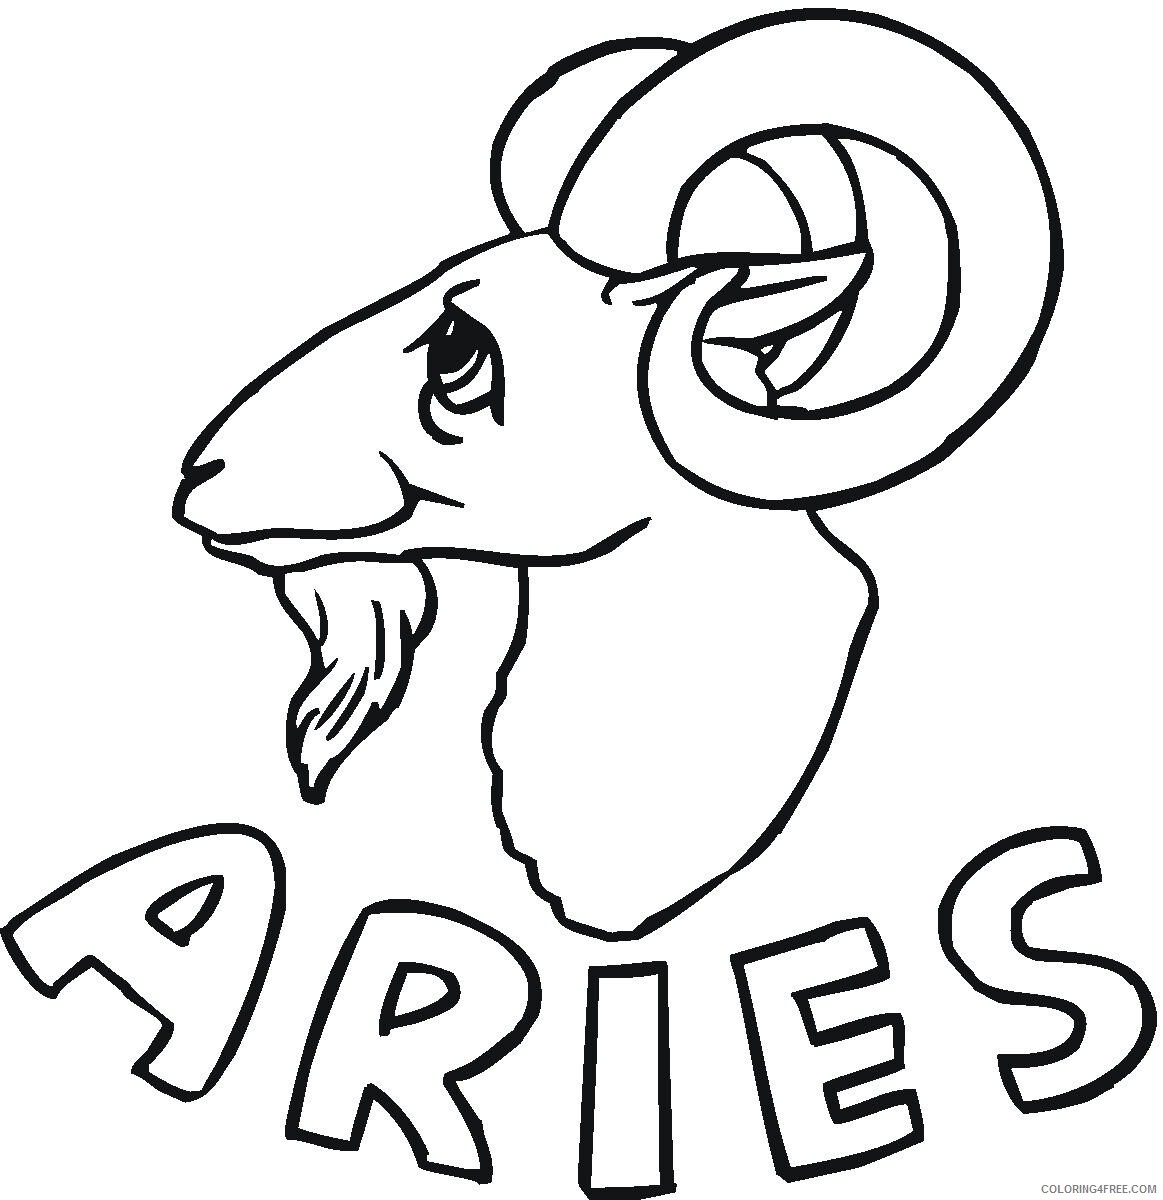 Zodiac Coloring Pages Educational zodiac 3 Printable 2020 2204 Coloring4free